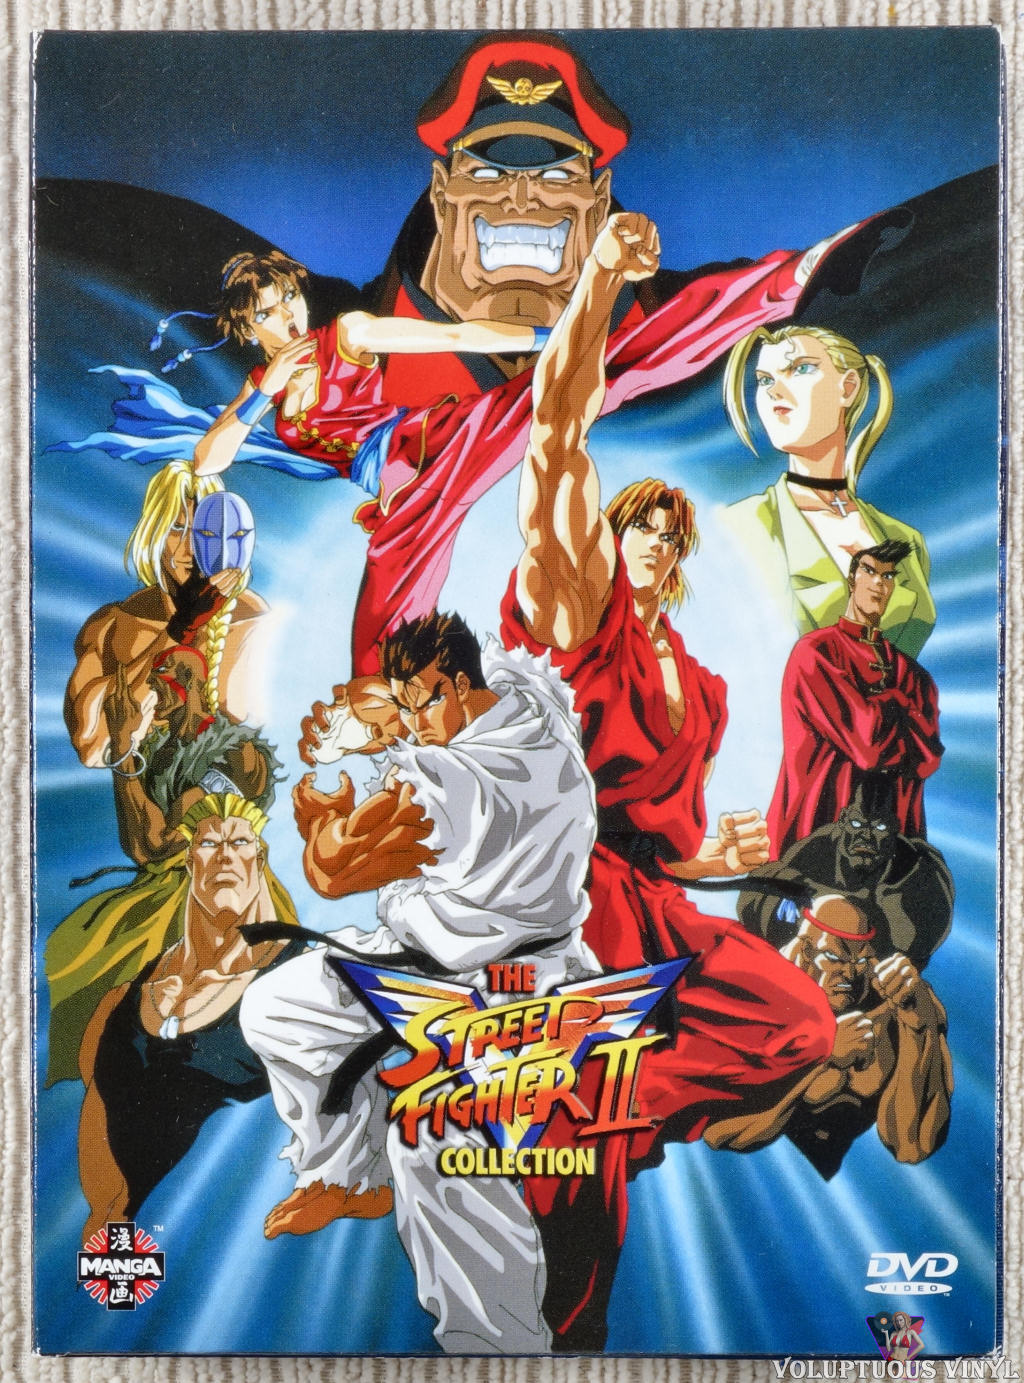 ANIMATION REVIEW: STREET FIGHTER II V—THE COLLECTION (2003) U.S.